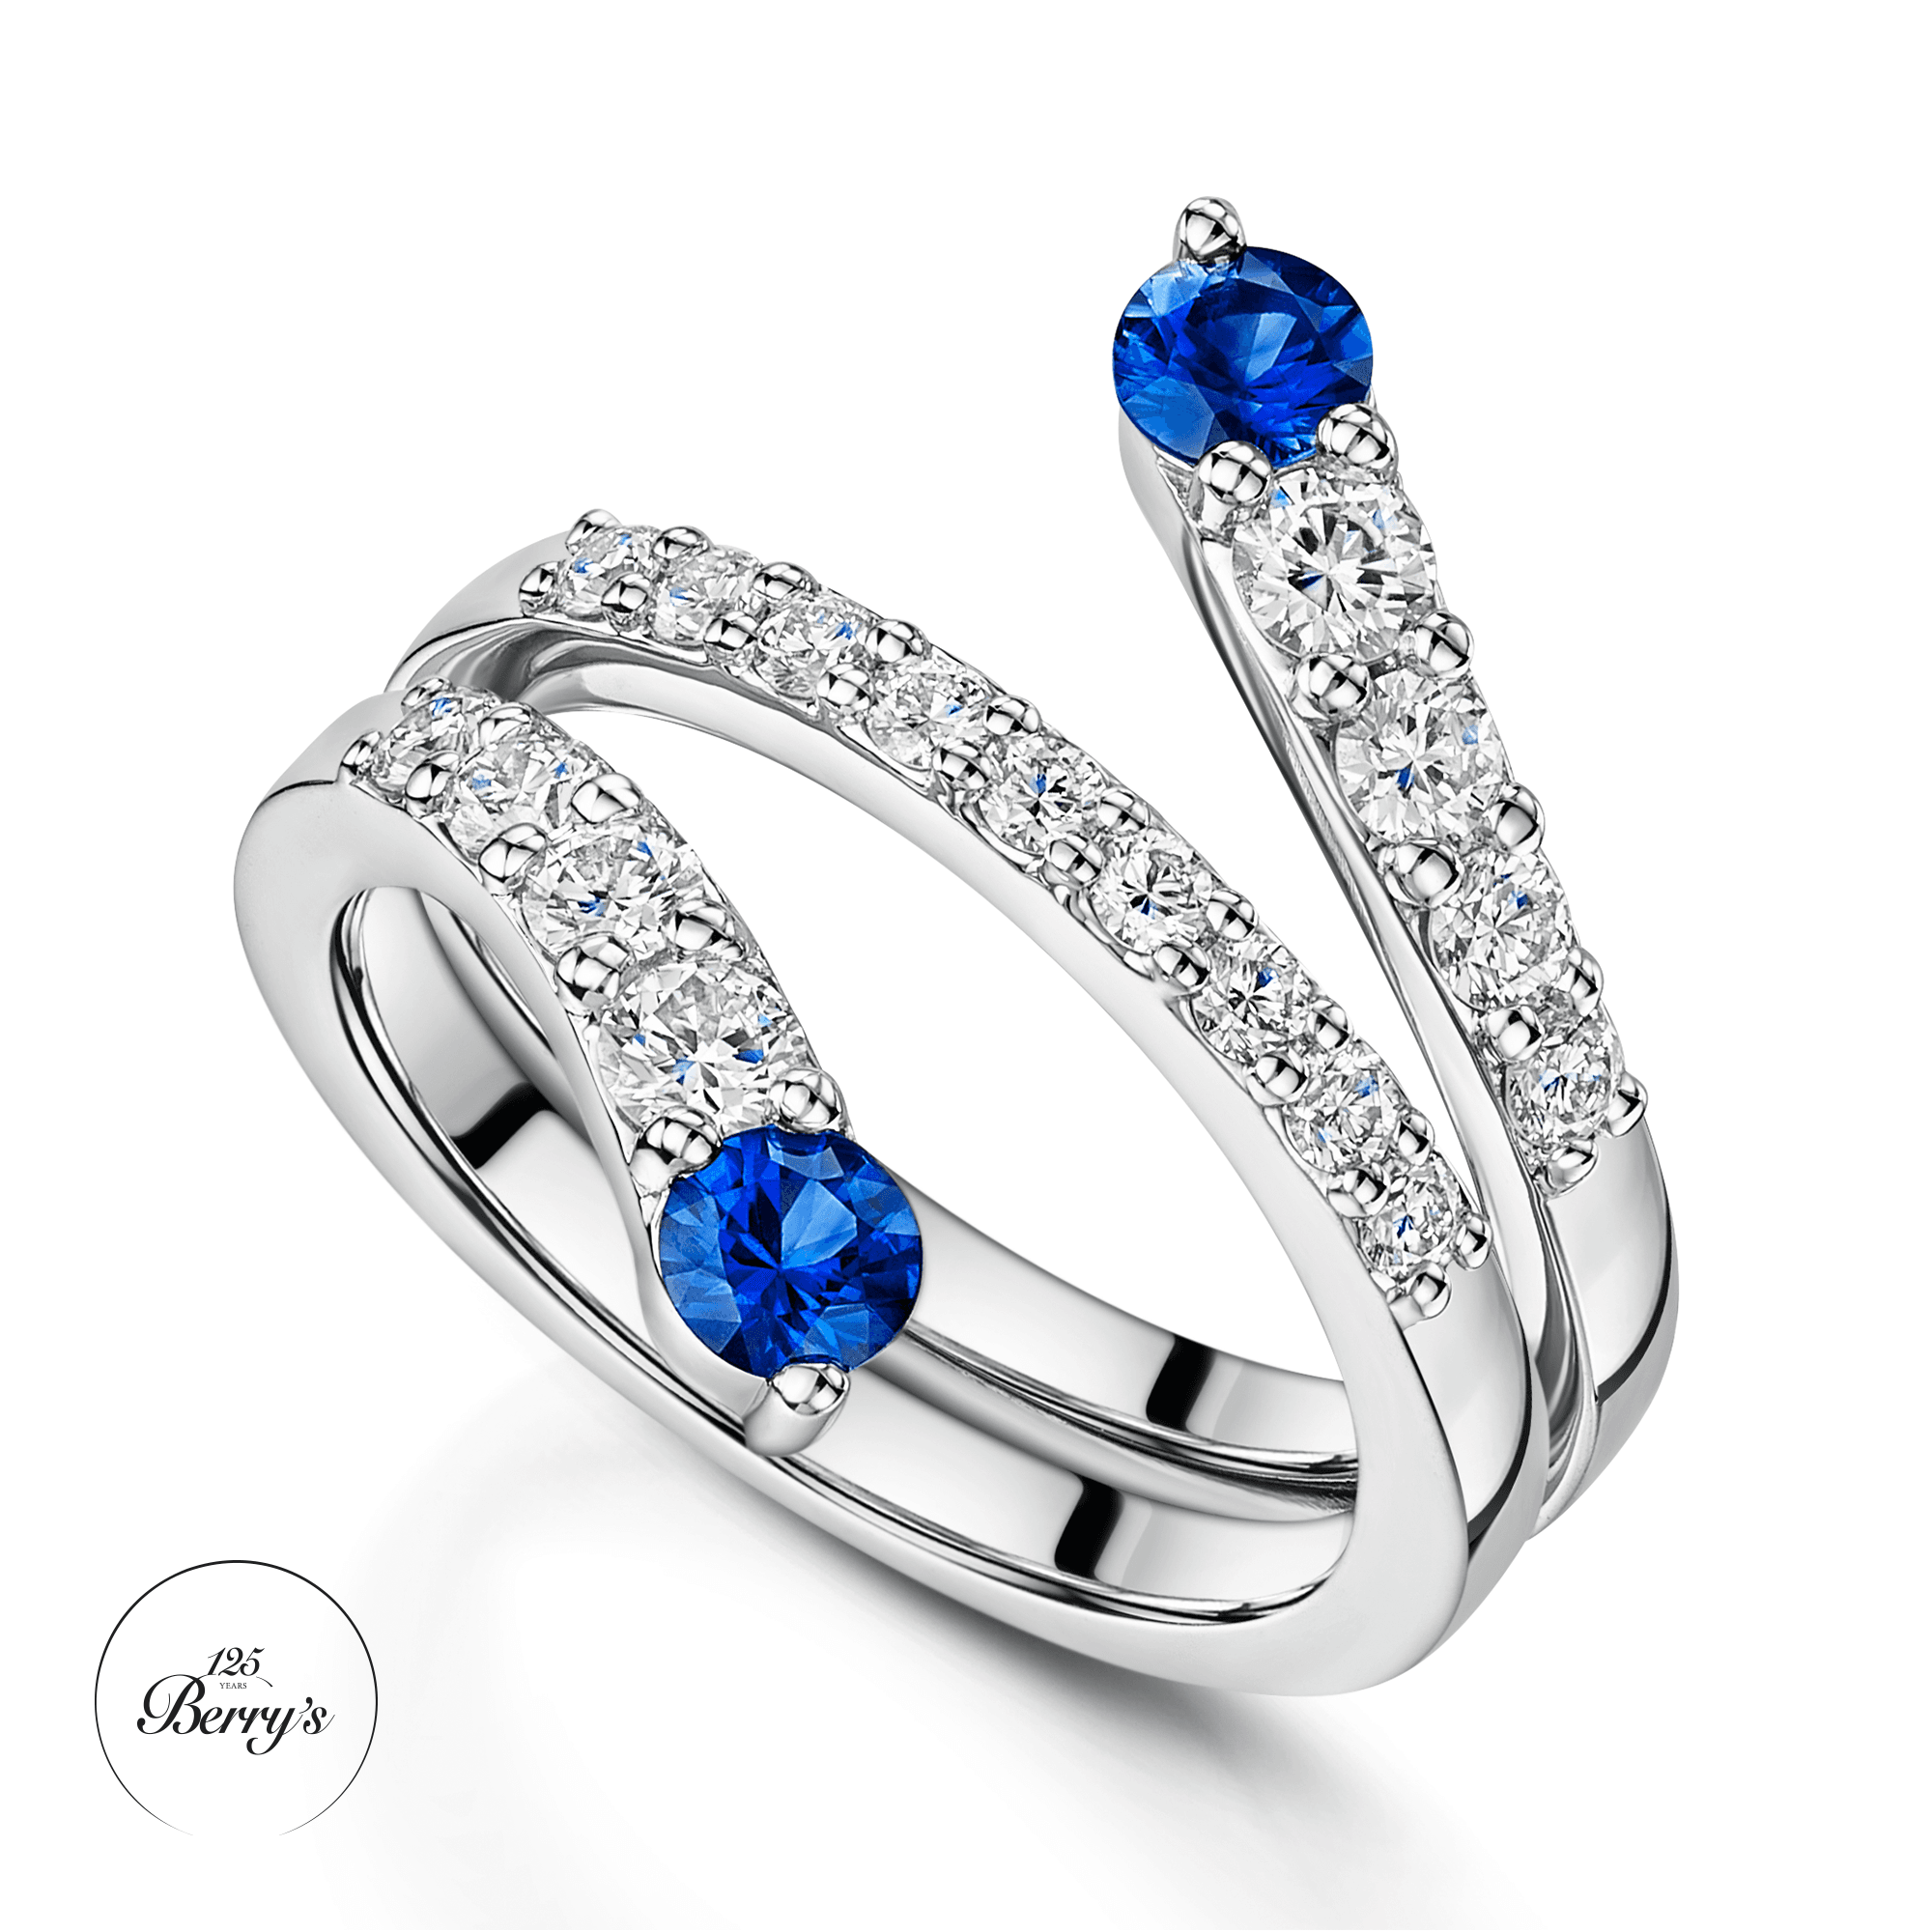 OPEIA Collection Platinum Round Brilliant Cut Sapphire And Diamond Fancy Triple Twist Ring